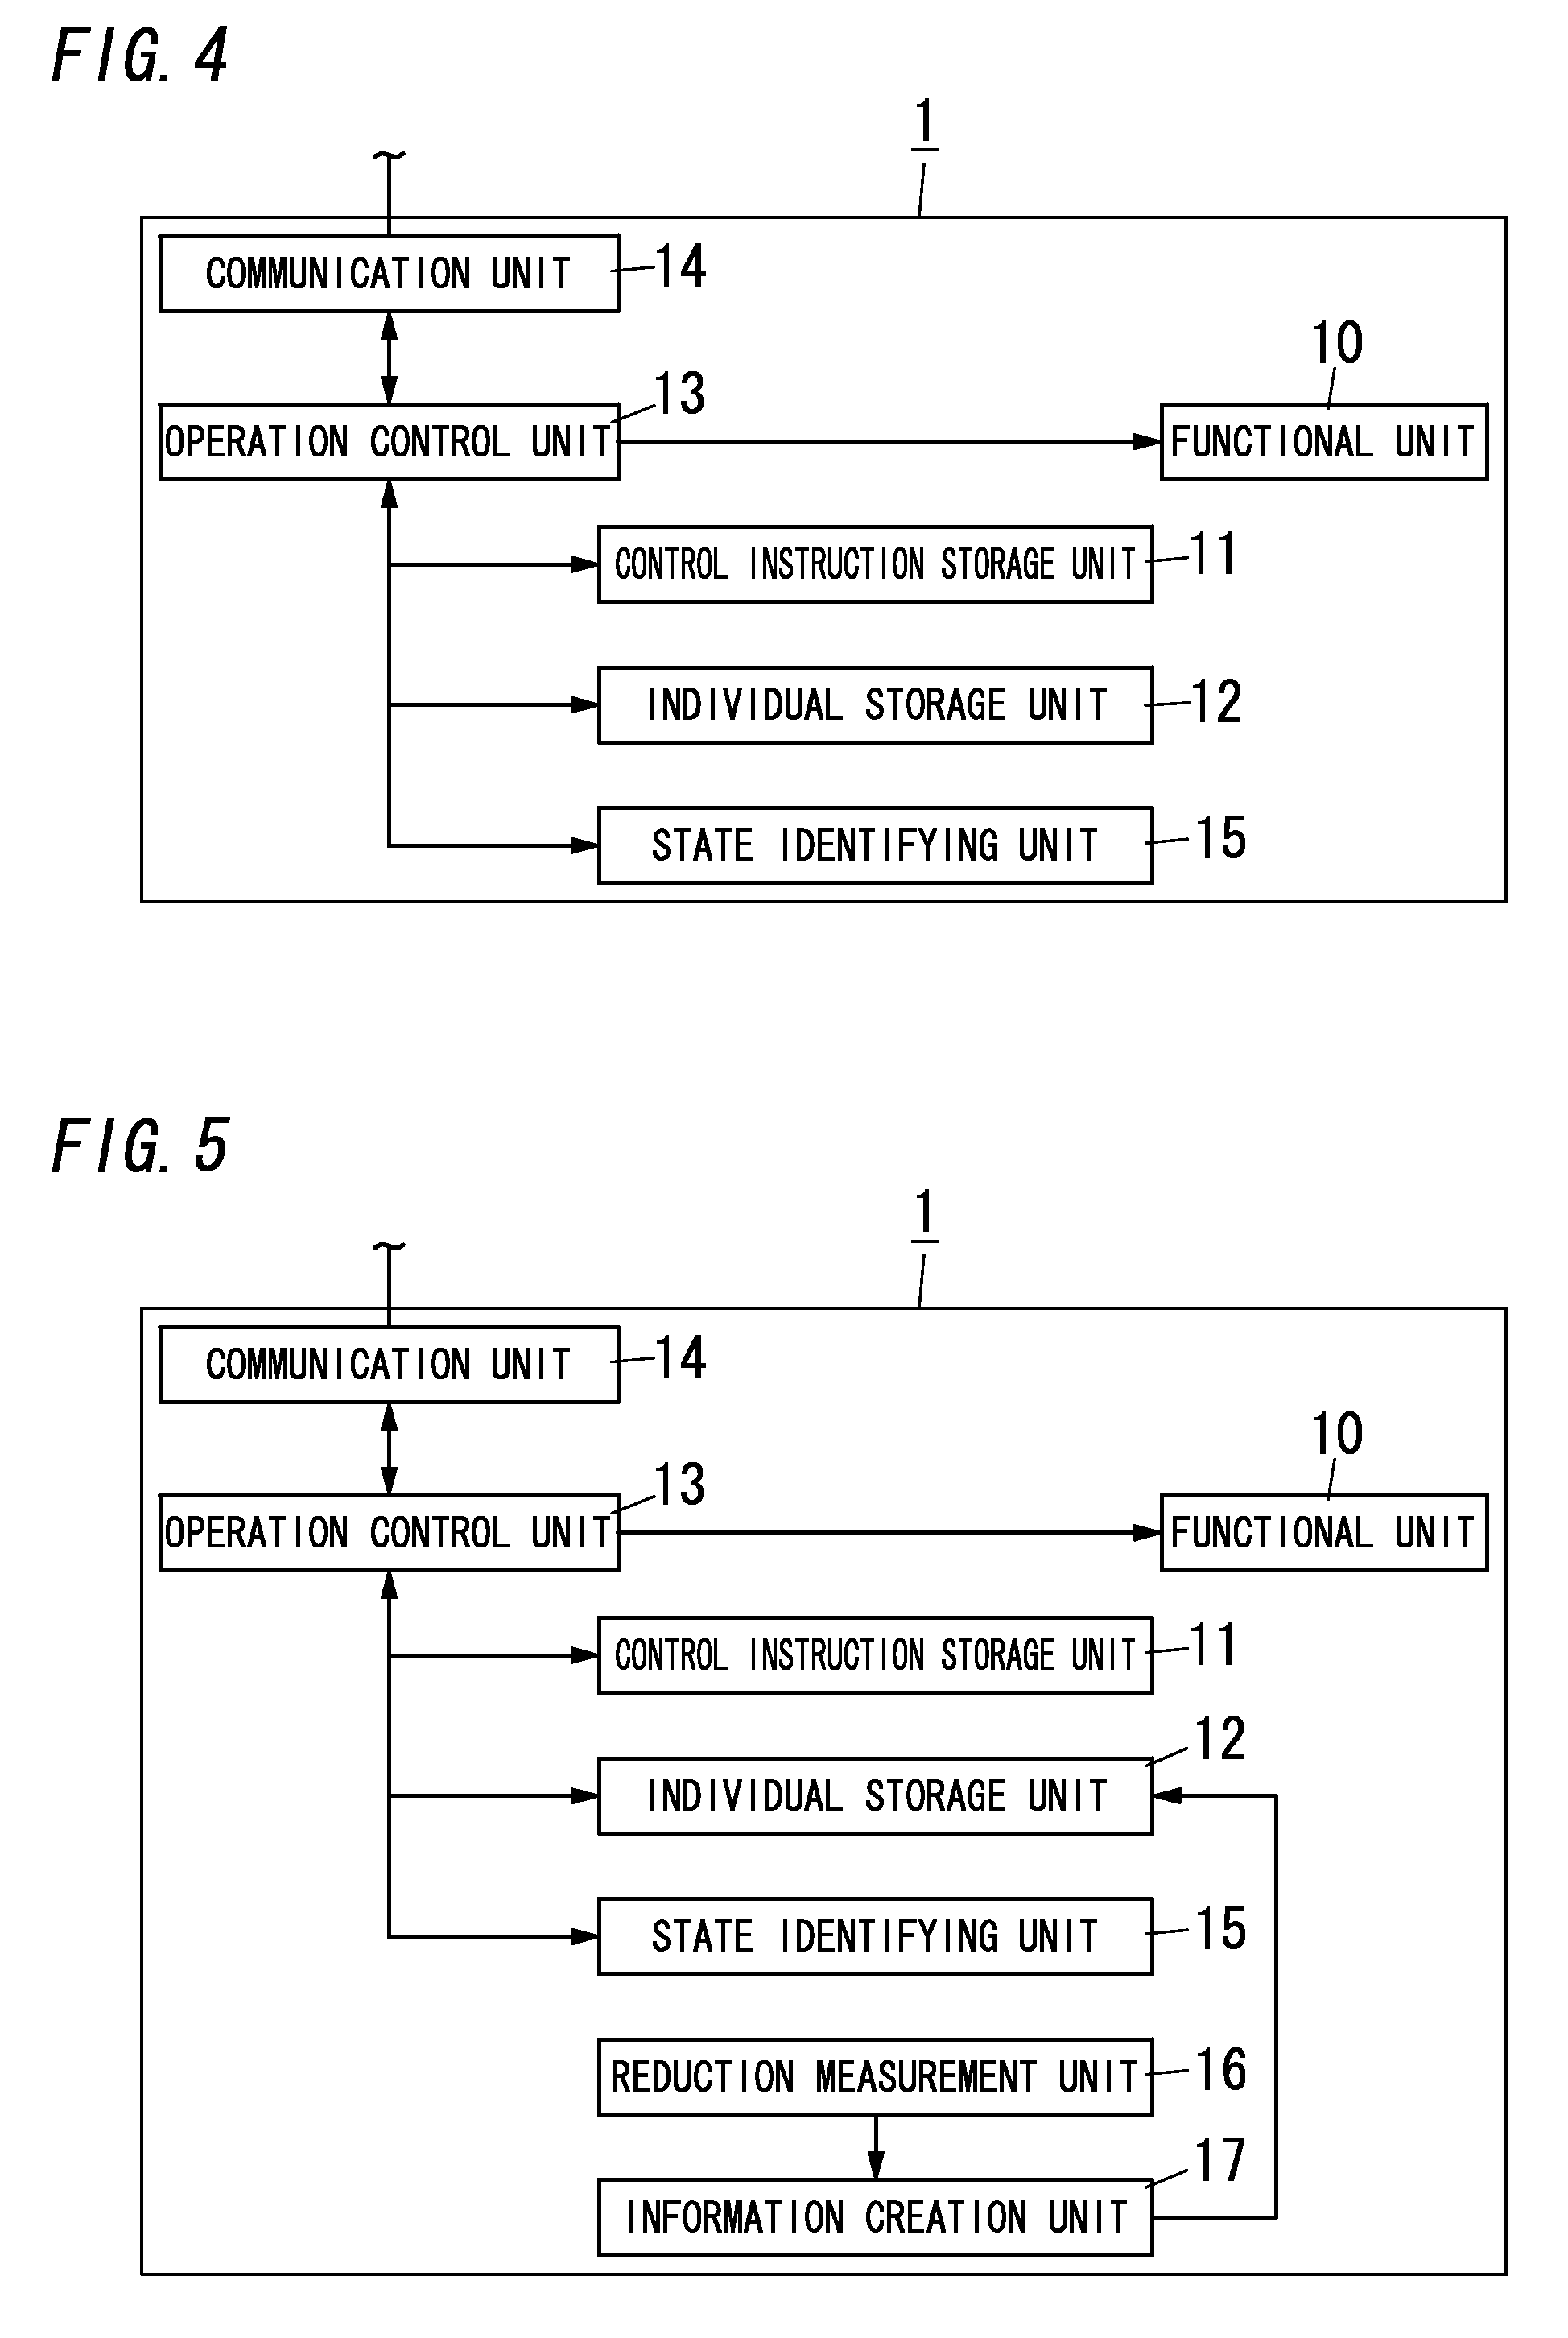 Appliance control system